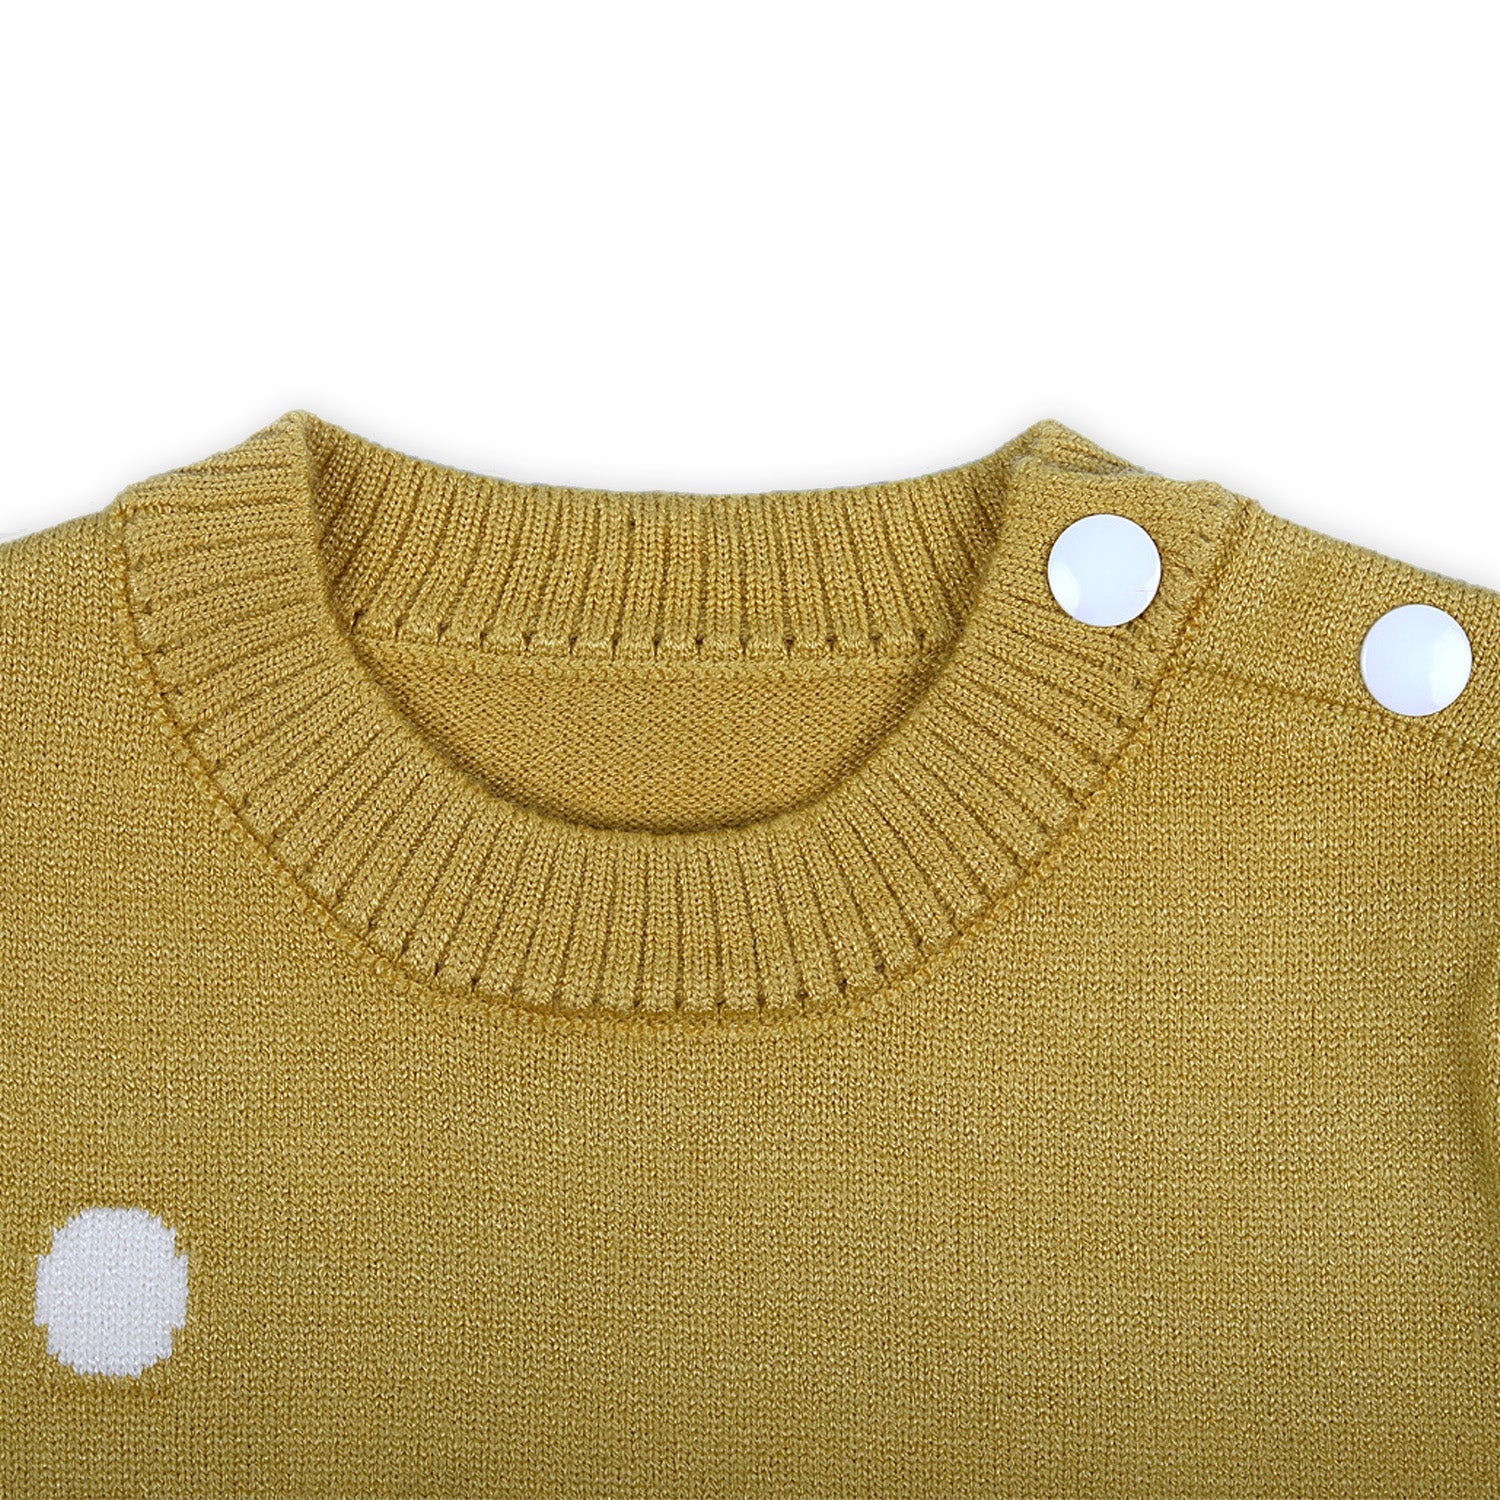 Elephant With 3D Ear Premium Full Sleeves Knitted Sweater - Mustard - Baby Moo